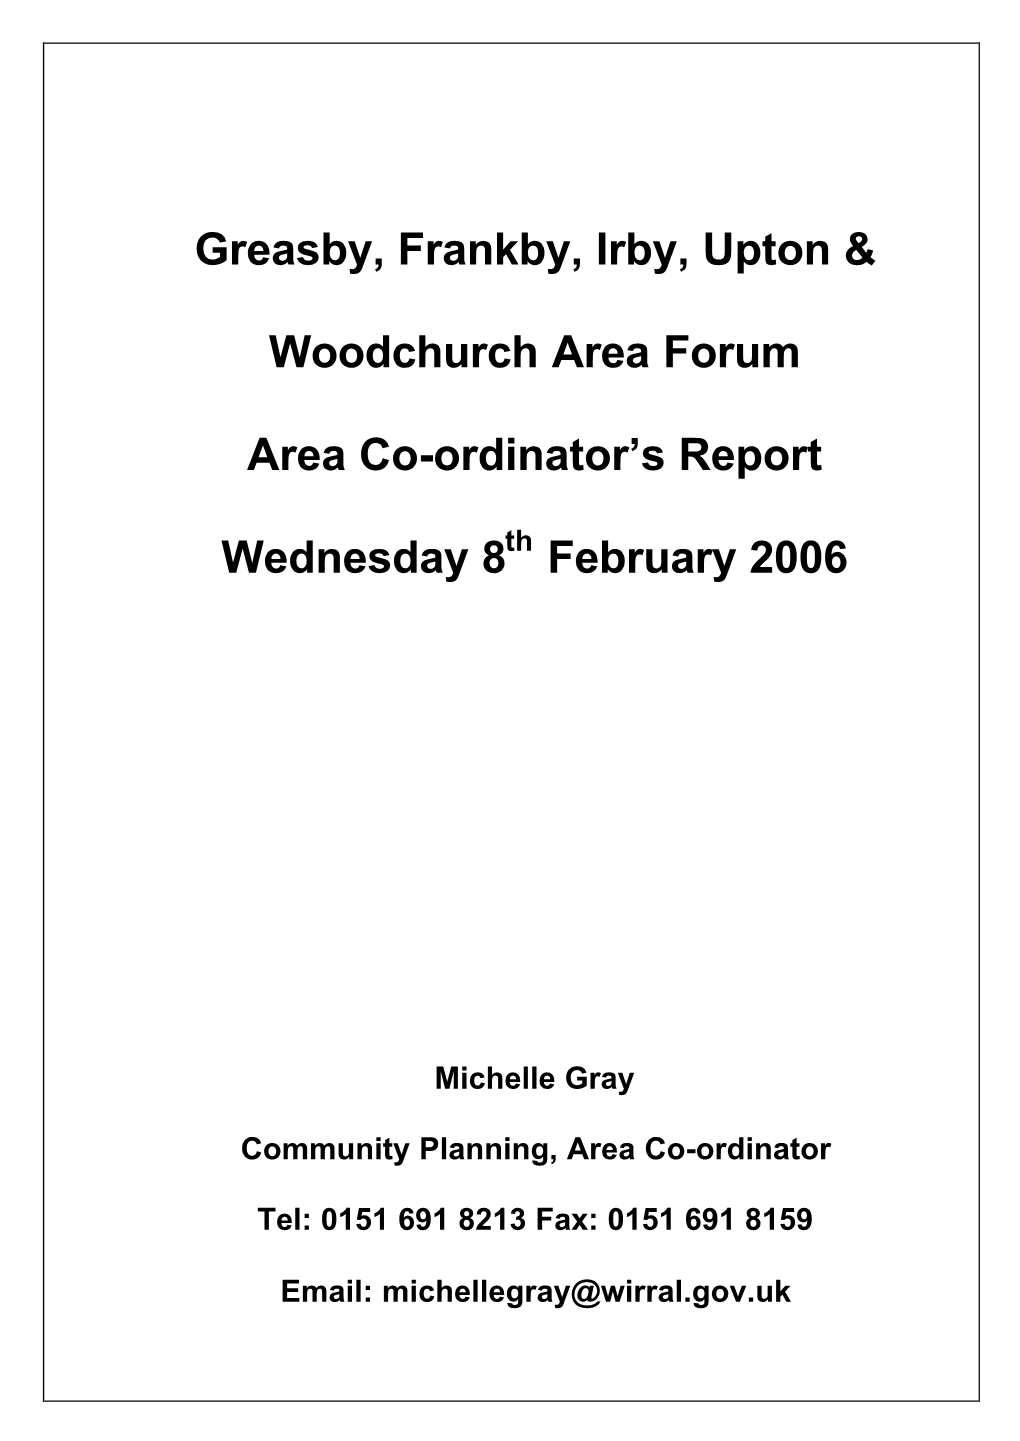 Greasby, Frankby, Irby, Upton & Woodchurch Area Forum Area Co